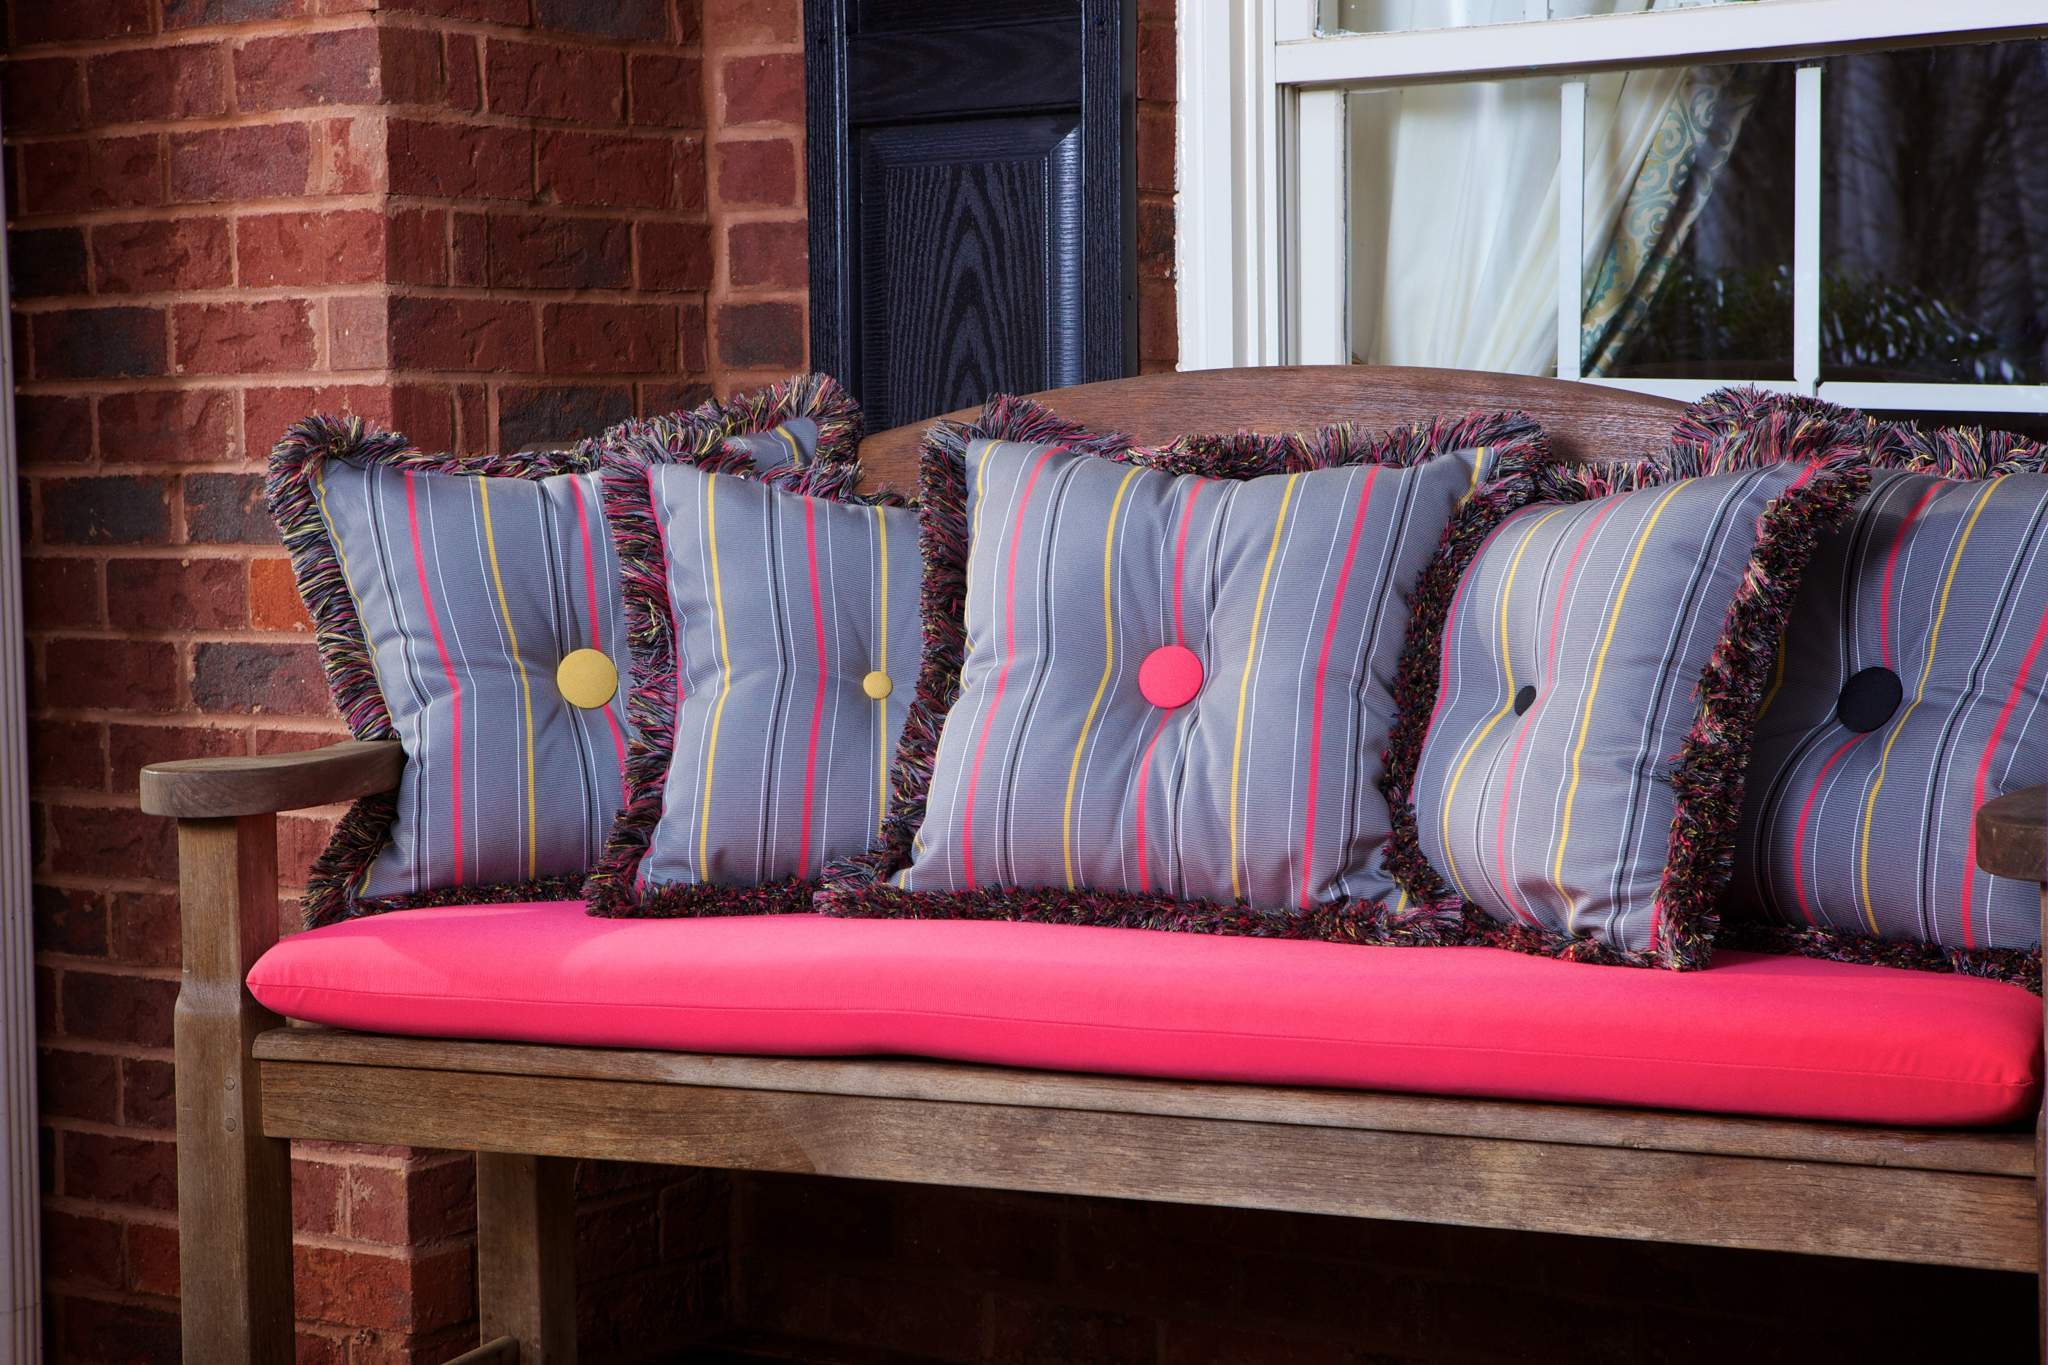 54 X 18 Bench Cushion Connection, 54 Inch Outdoor Swing Cushion